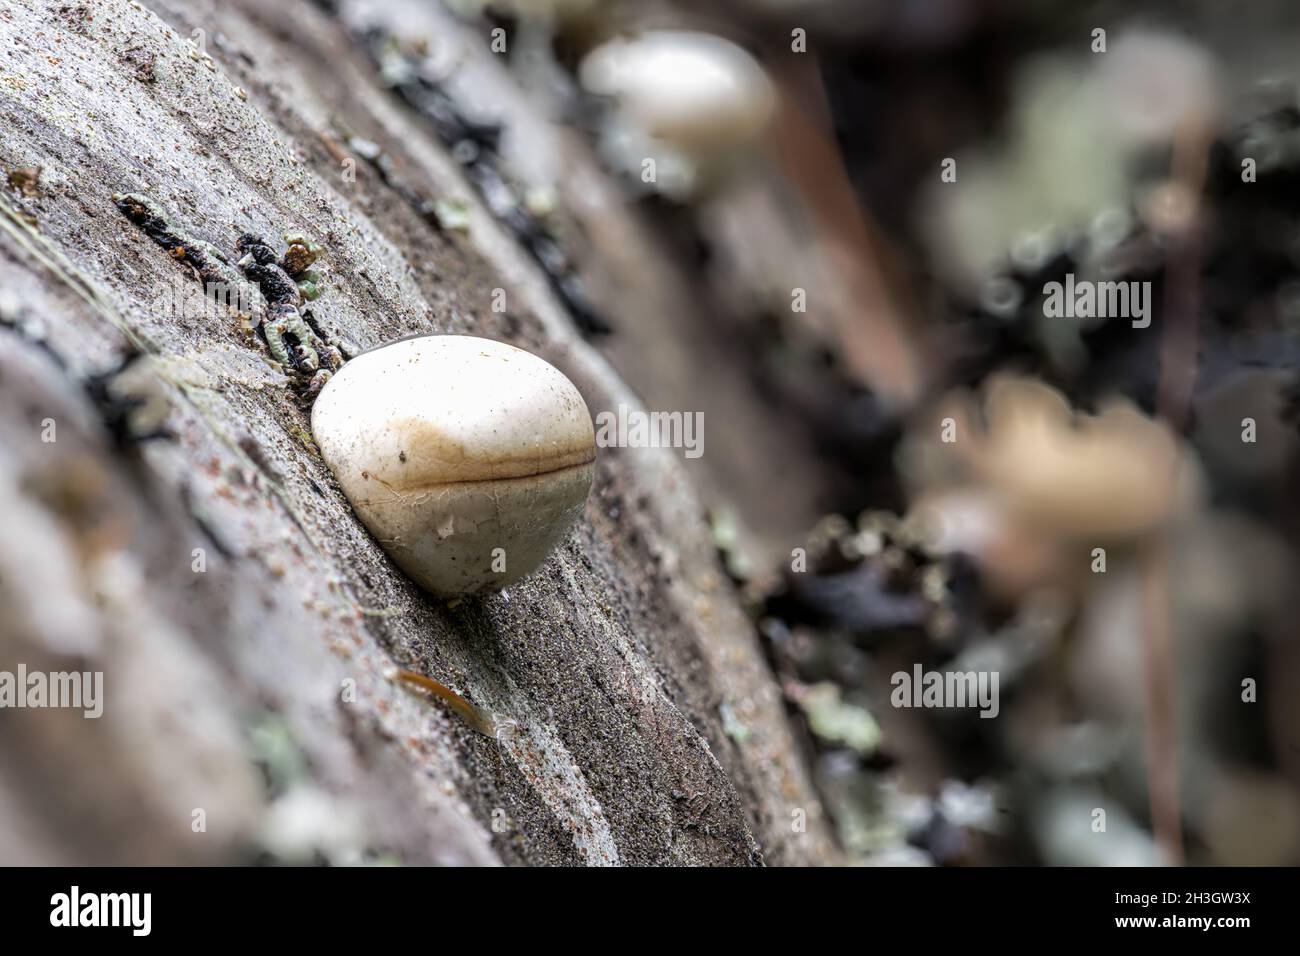 White Fungus Growing out of a Decomposing Tree in Idaho Stock Photo